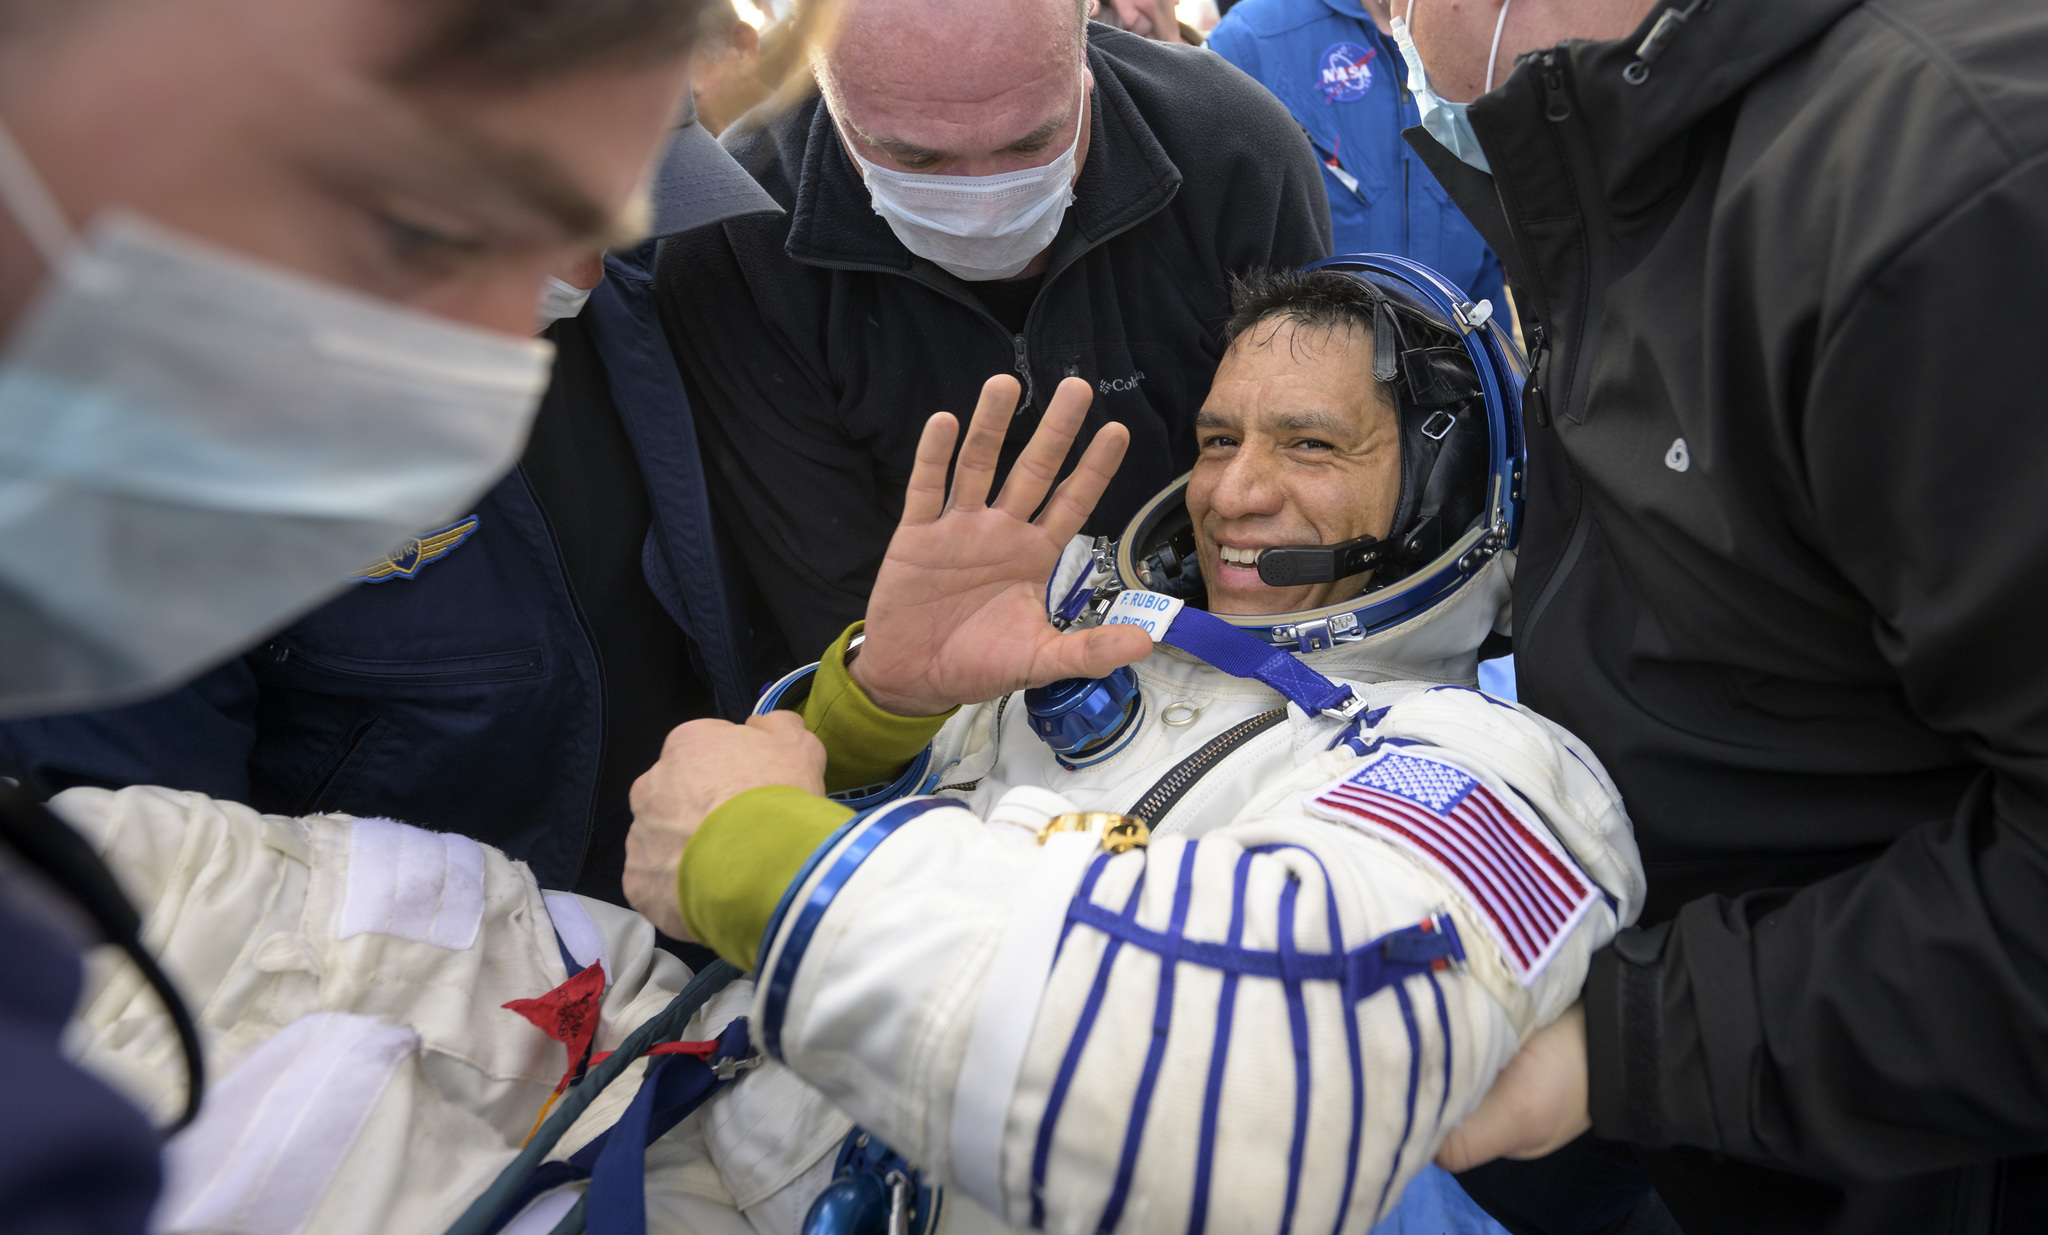 NASA astronaut Frank Rubio is helped out of the Soyuz MS-23 spacecraft just minutes after he landed near the town of Zhezkazgan, Kazakhstan